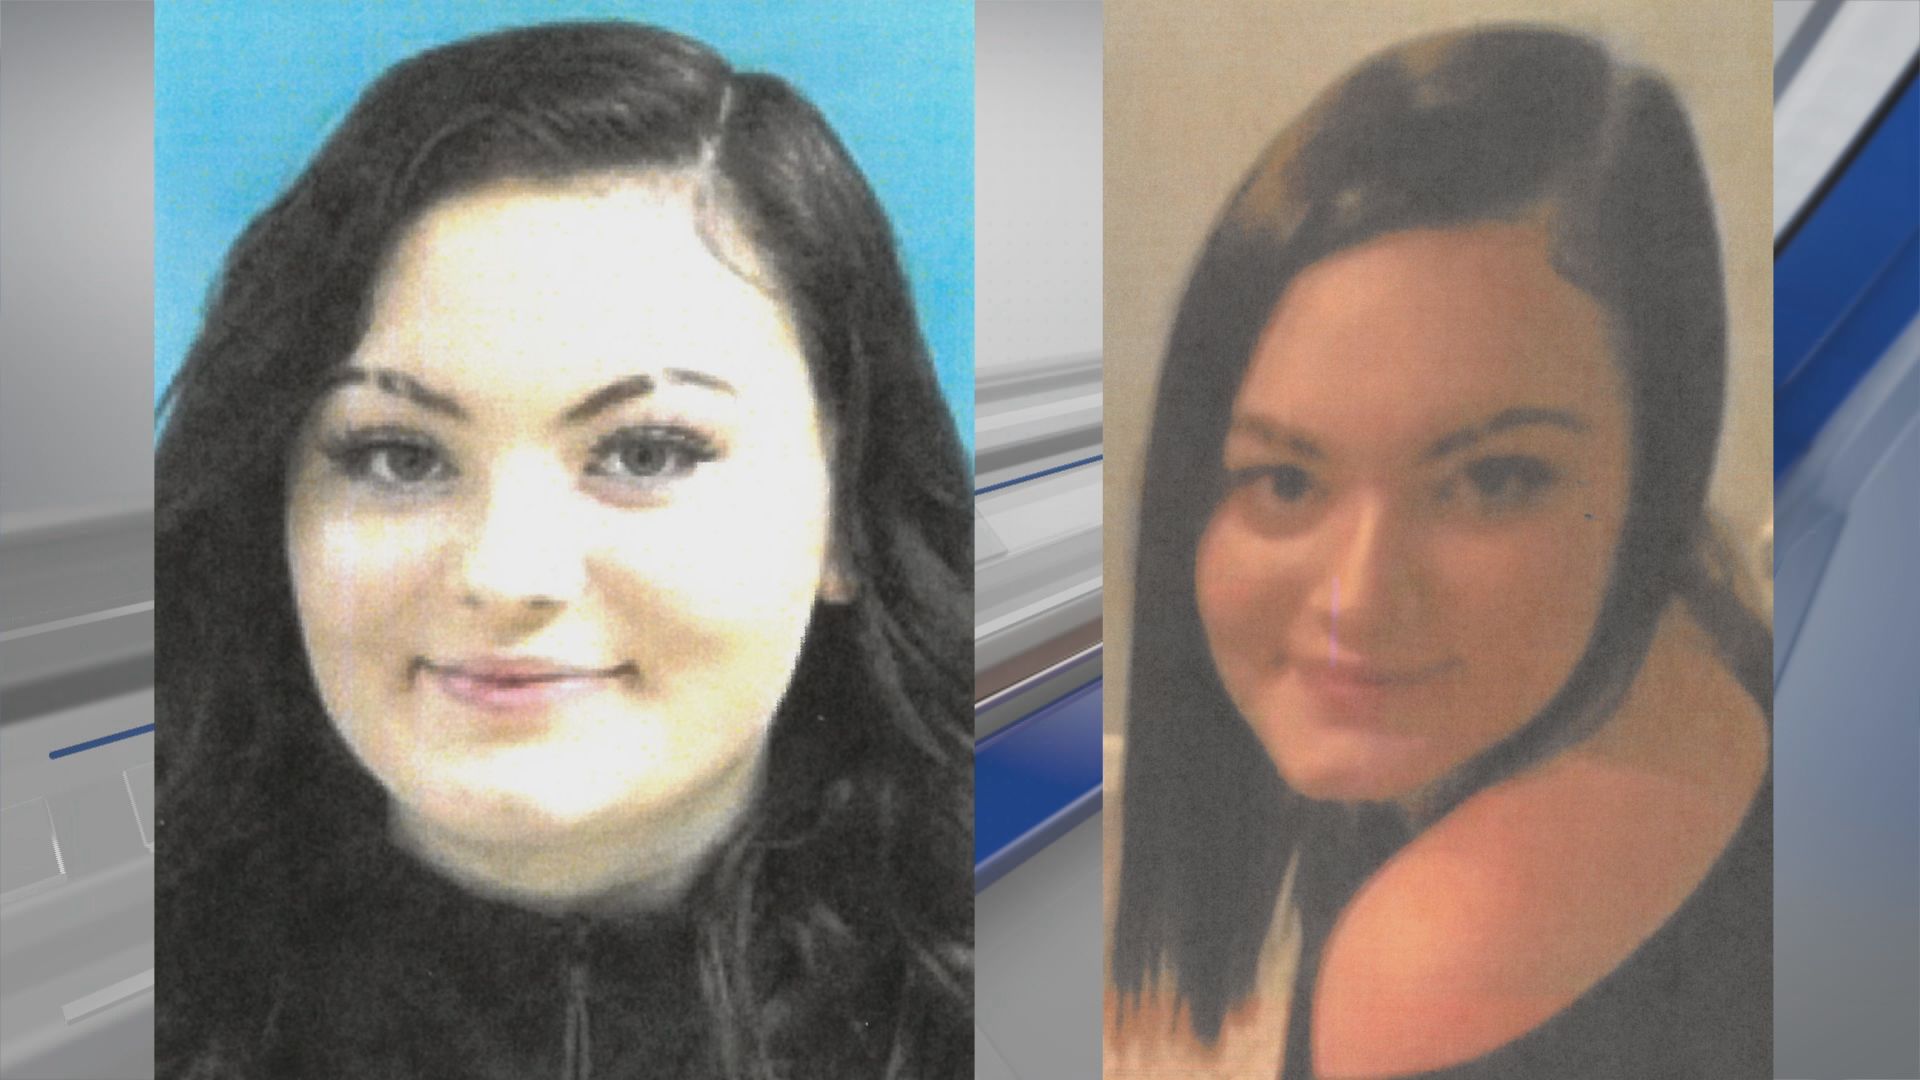 Authorities searching for missing Prattville teen